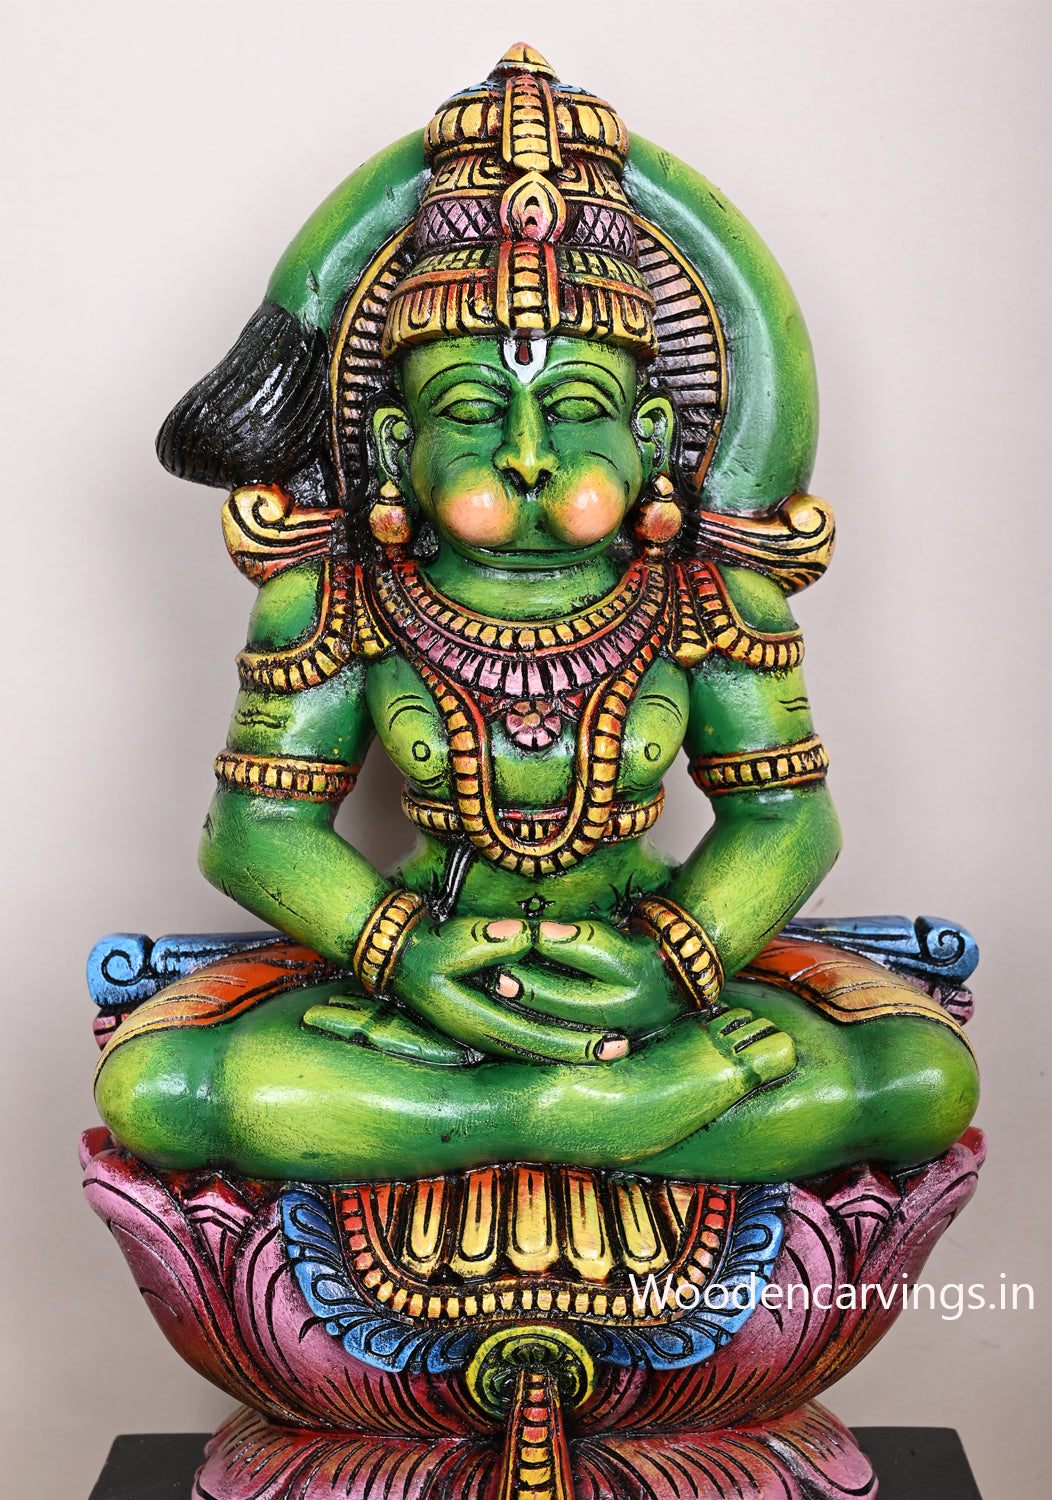 Wooden Colourful Green Lord Hanuman Sitting On Pink Lotus Doing Thyana Beautiful Sculpture 24"